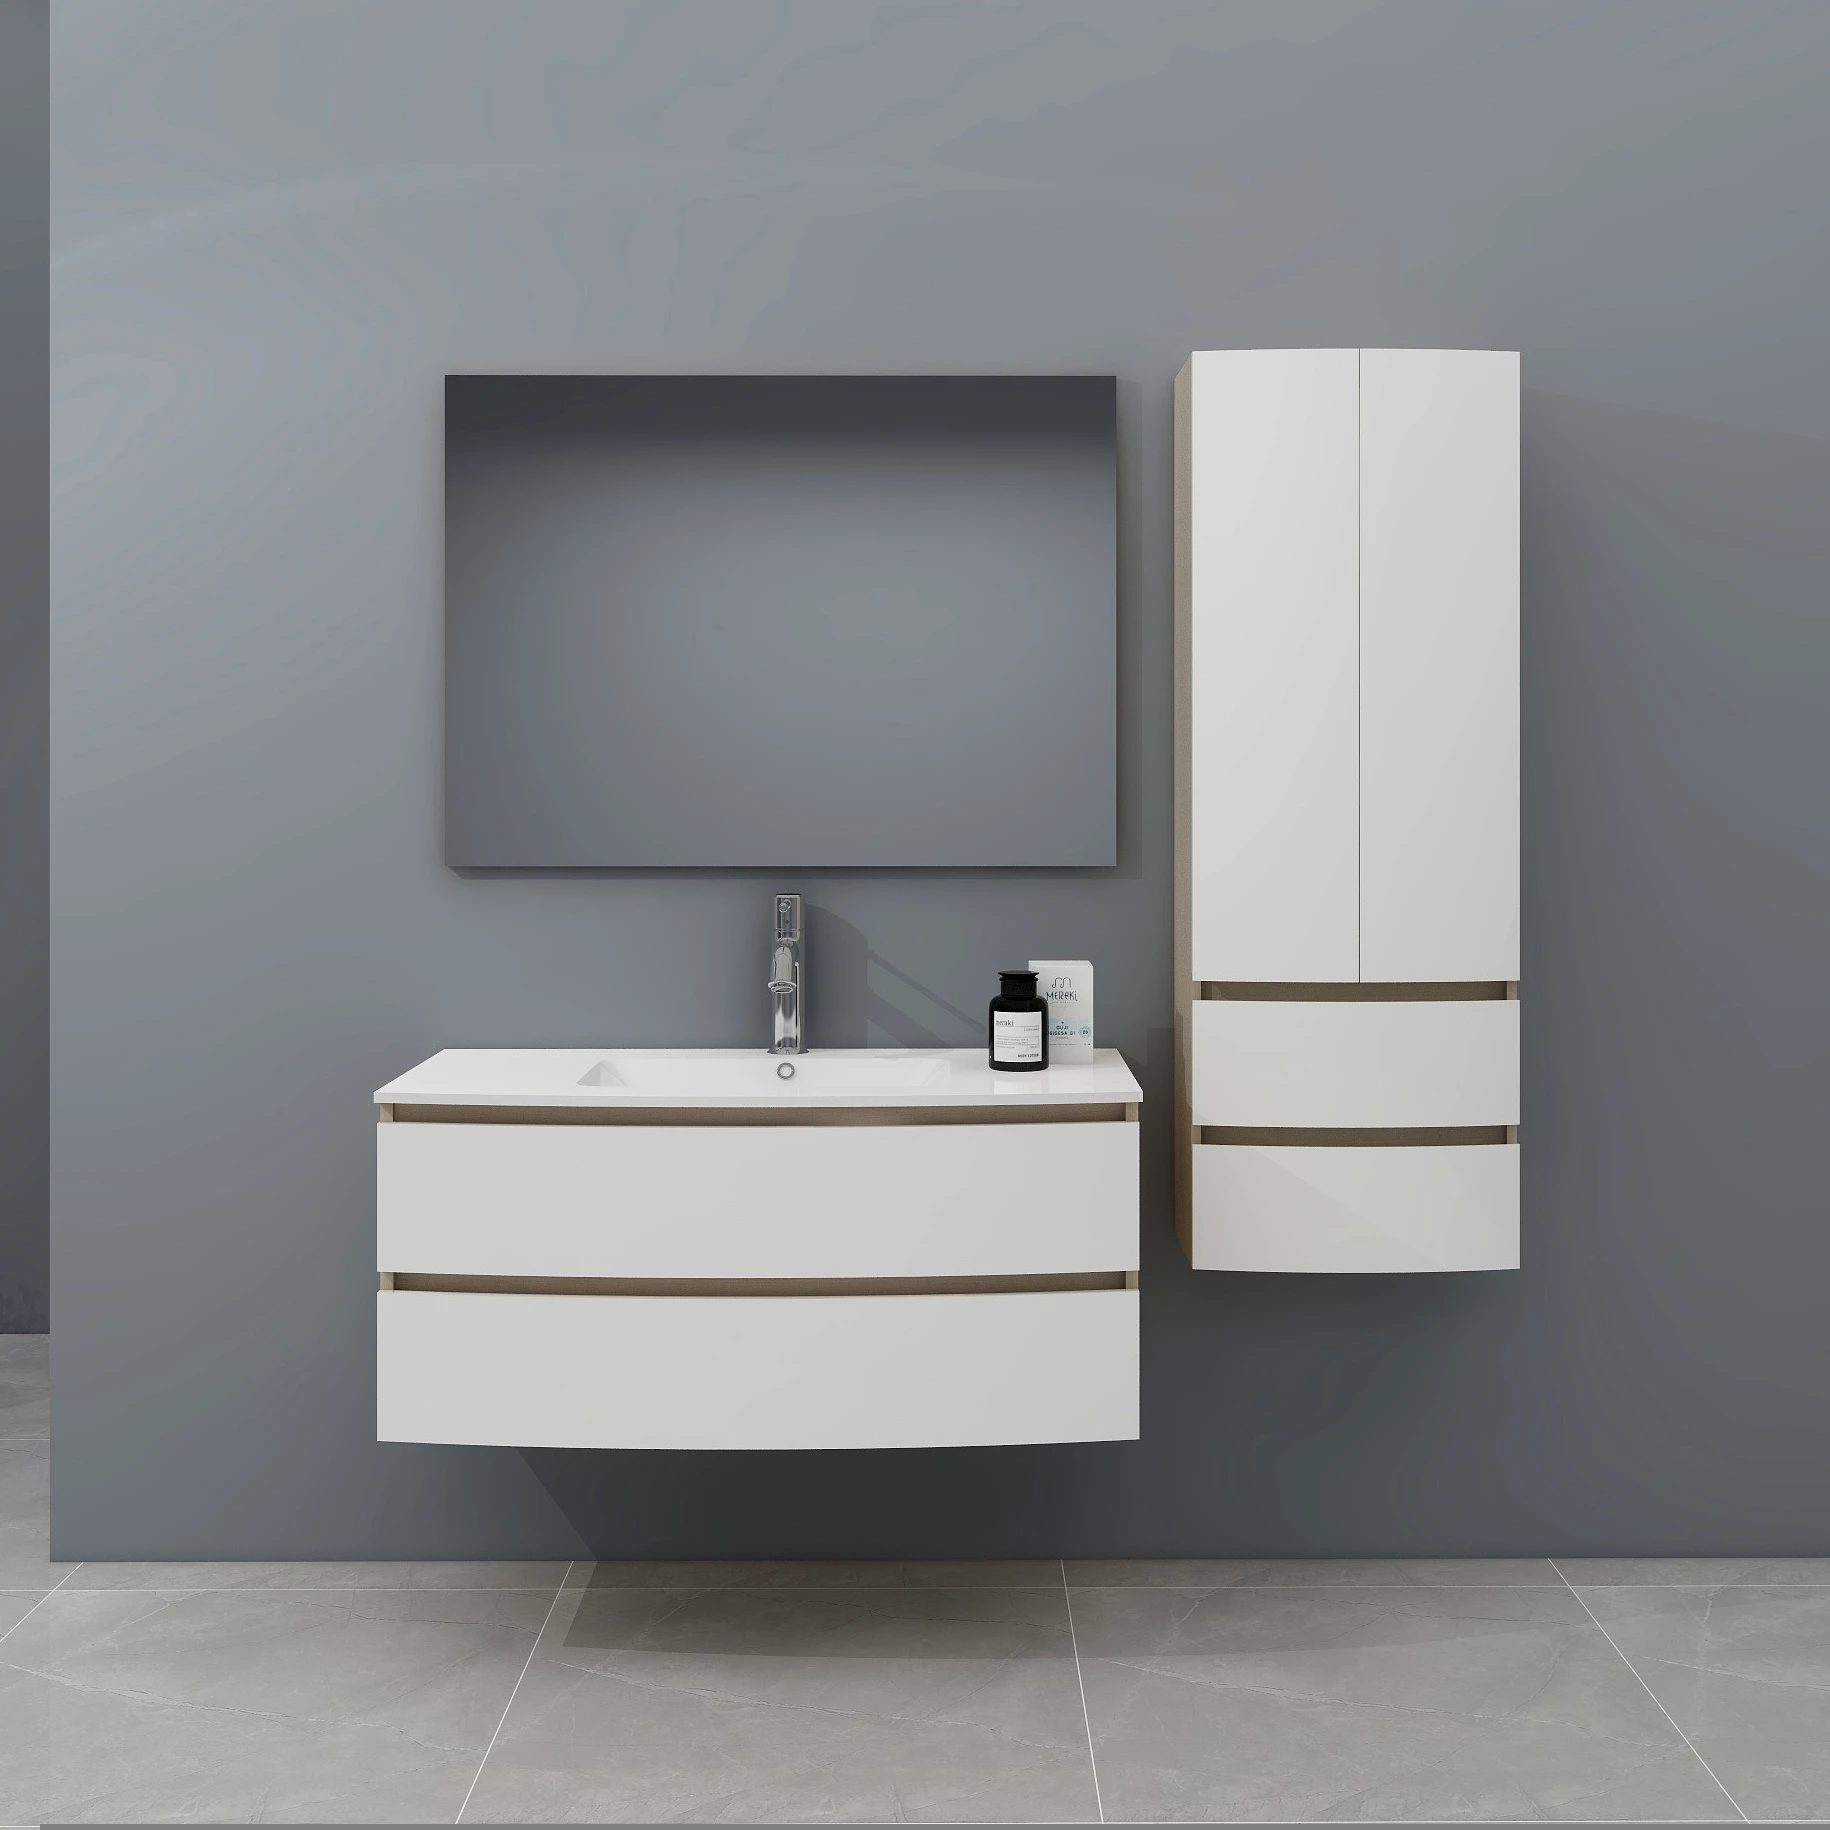 Curved set of mdf&pvc bathroom cabinet wall-mounted with side cabinet